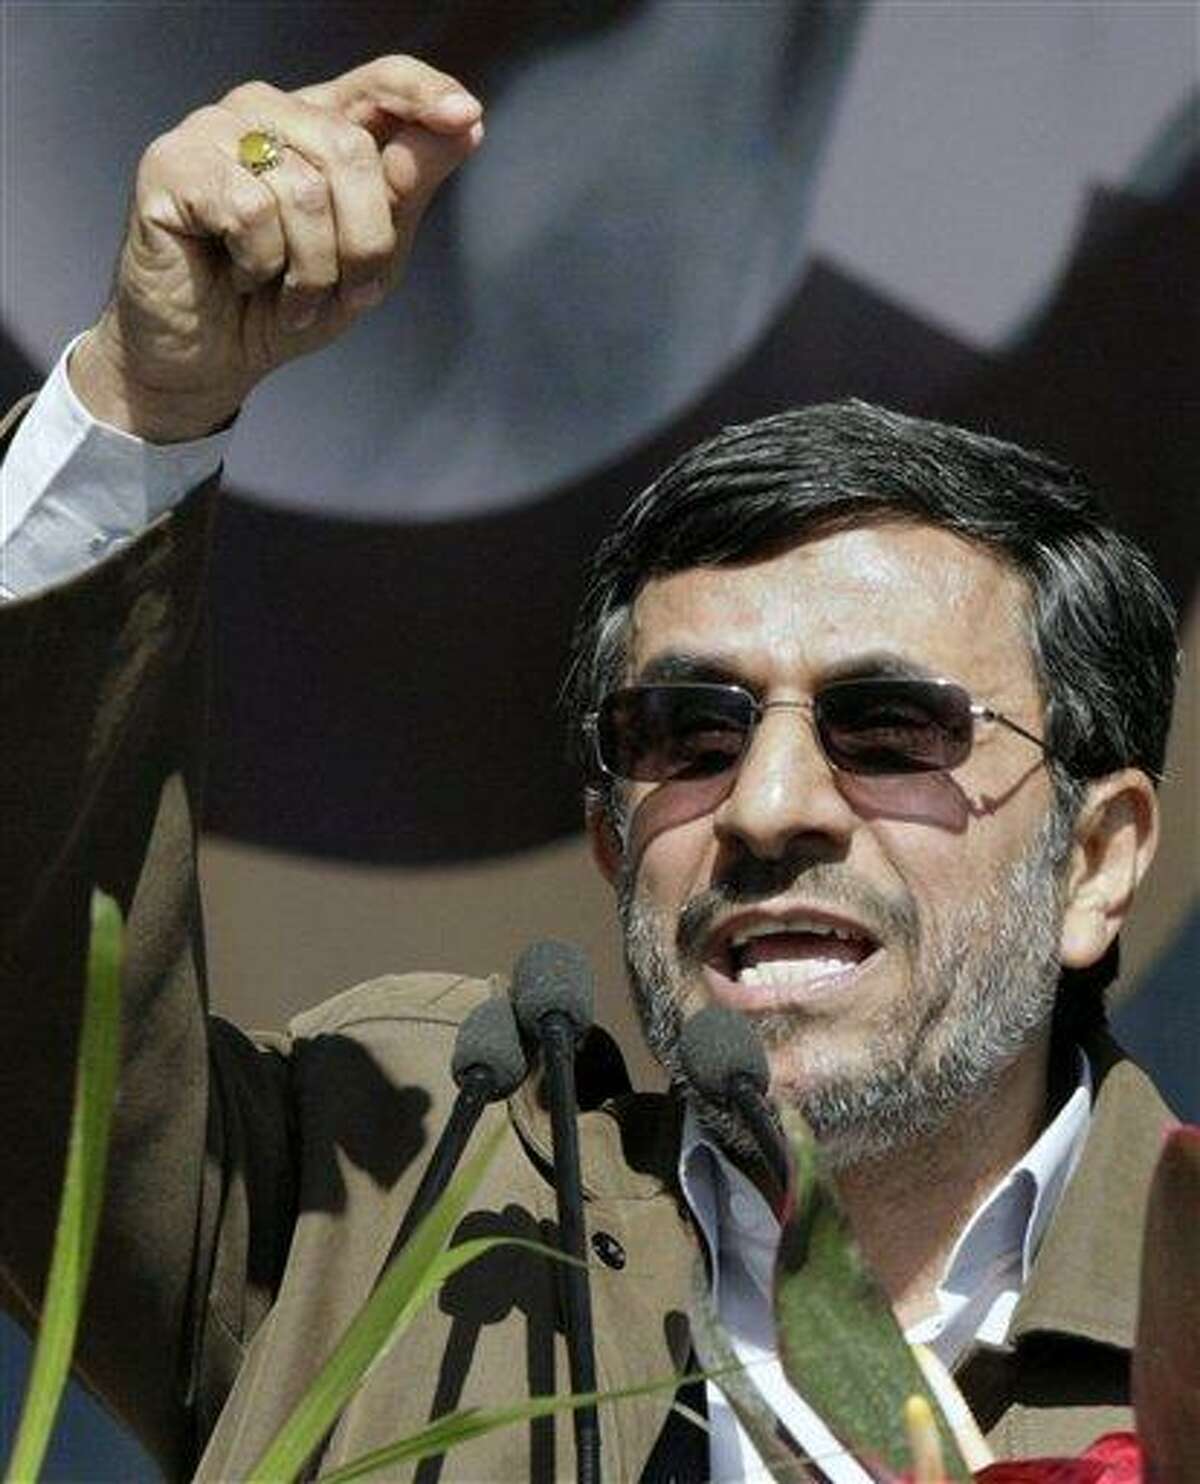 Iranian President Mahmoud Ahmadinejad gestures Saturday as he deliver his speech at a rally to mark the 33rd anniversary of the Islamic Revolution that toppled the country's pro-Western monarchy and brought Islamic clerics to power. Ahmadinejad says Iran will soon reveal "very big new nuclear achievements." Associated Press